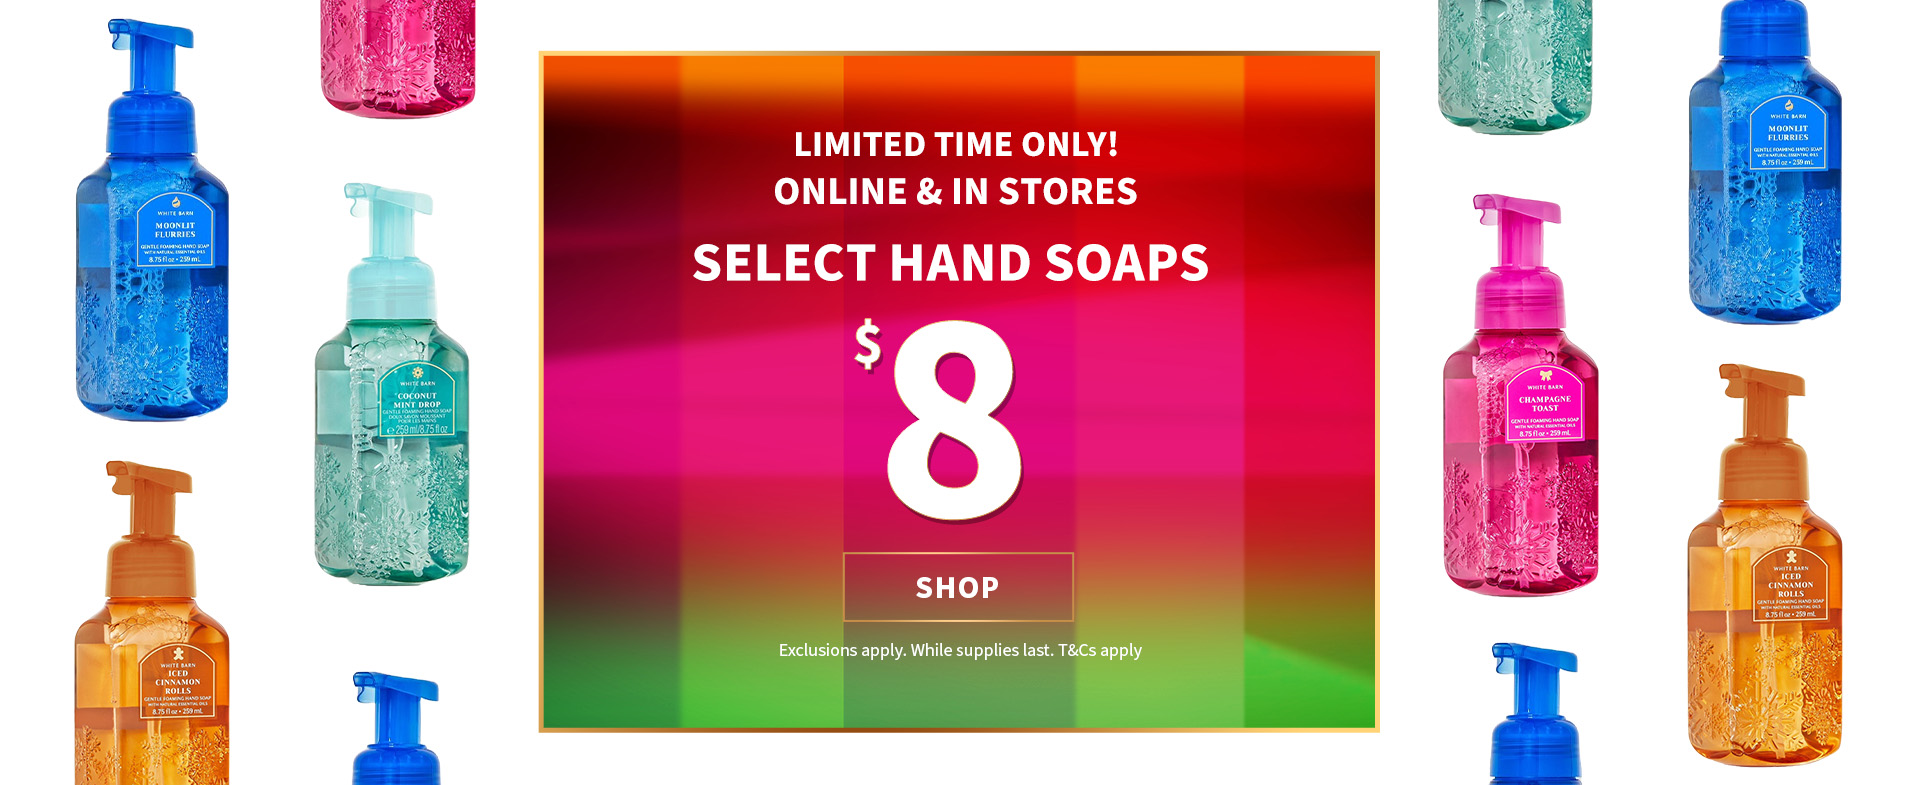 LIMITED TIME ONLY! ONLINE & IN STORES SELECT HAND SOAPS